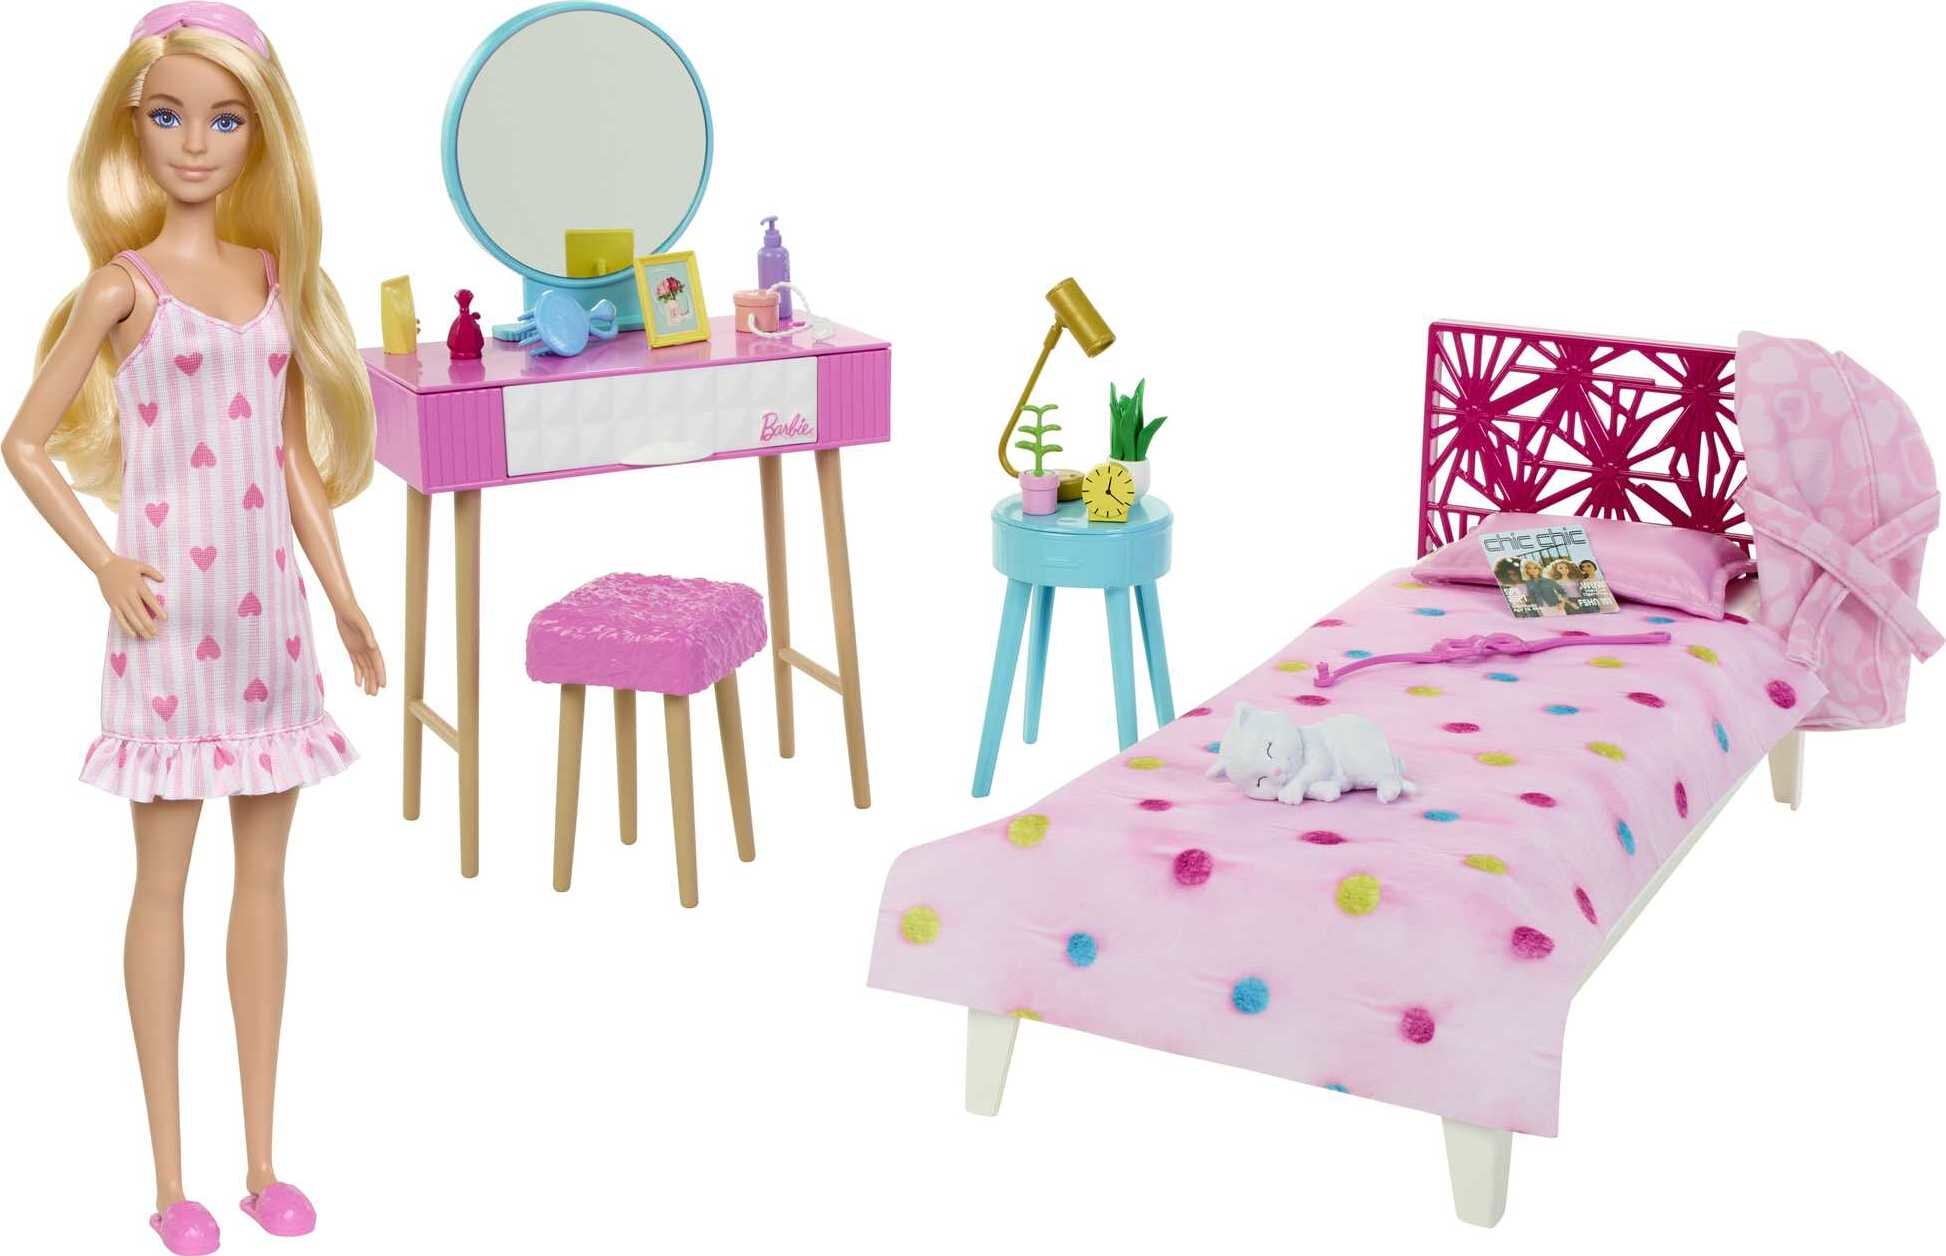 Barbie Doll and Bedroom Playset, Furniture 20+ Storytelling Pieces and Accessories - Walmart.com